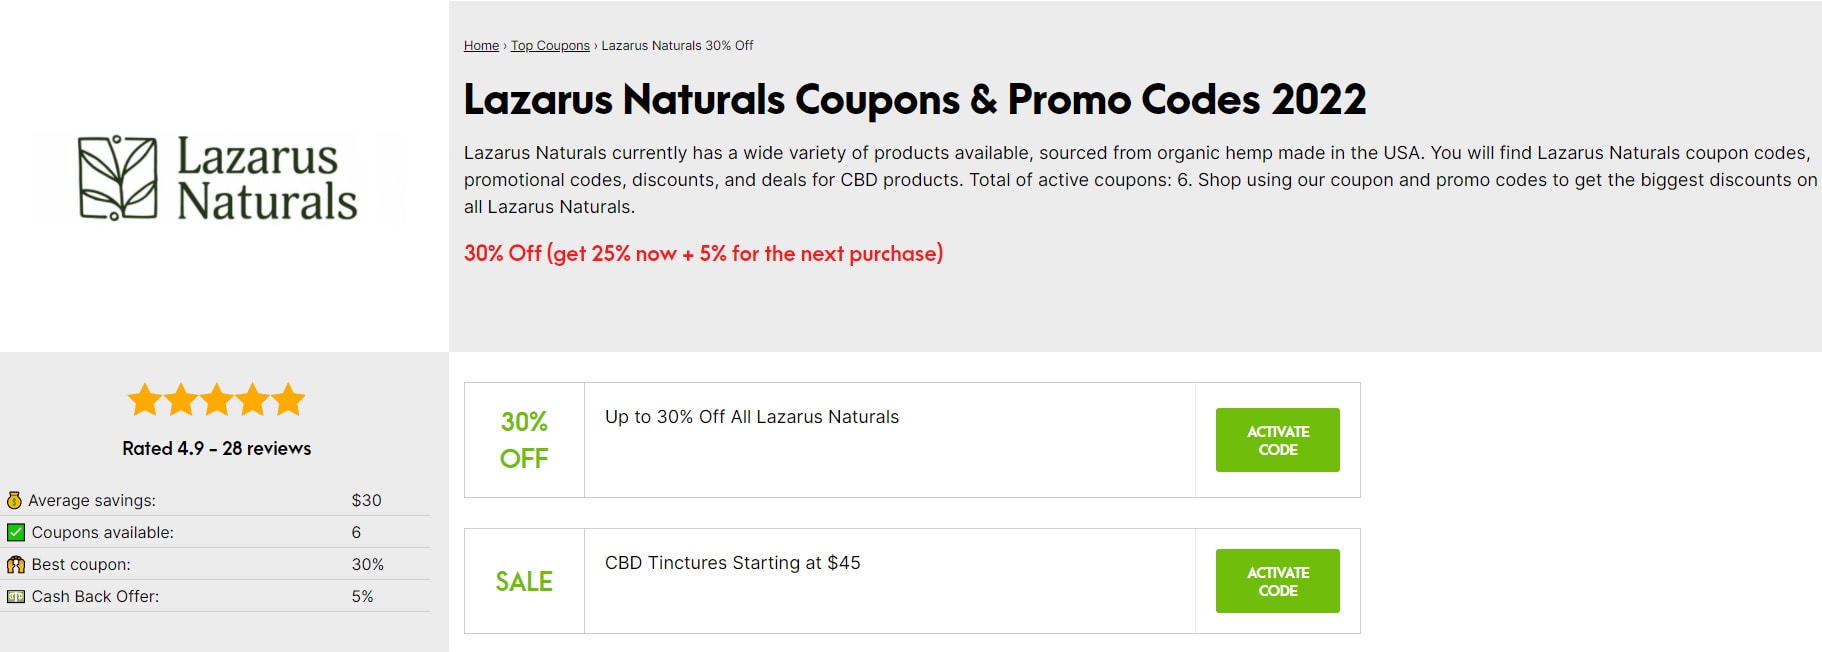 Best Coupons and Promo & Deals for CBD Brands 